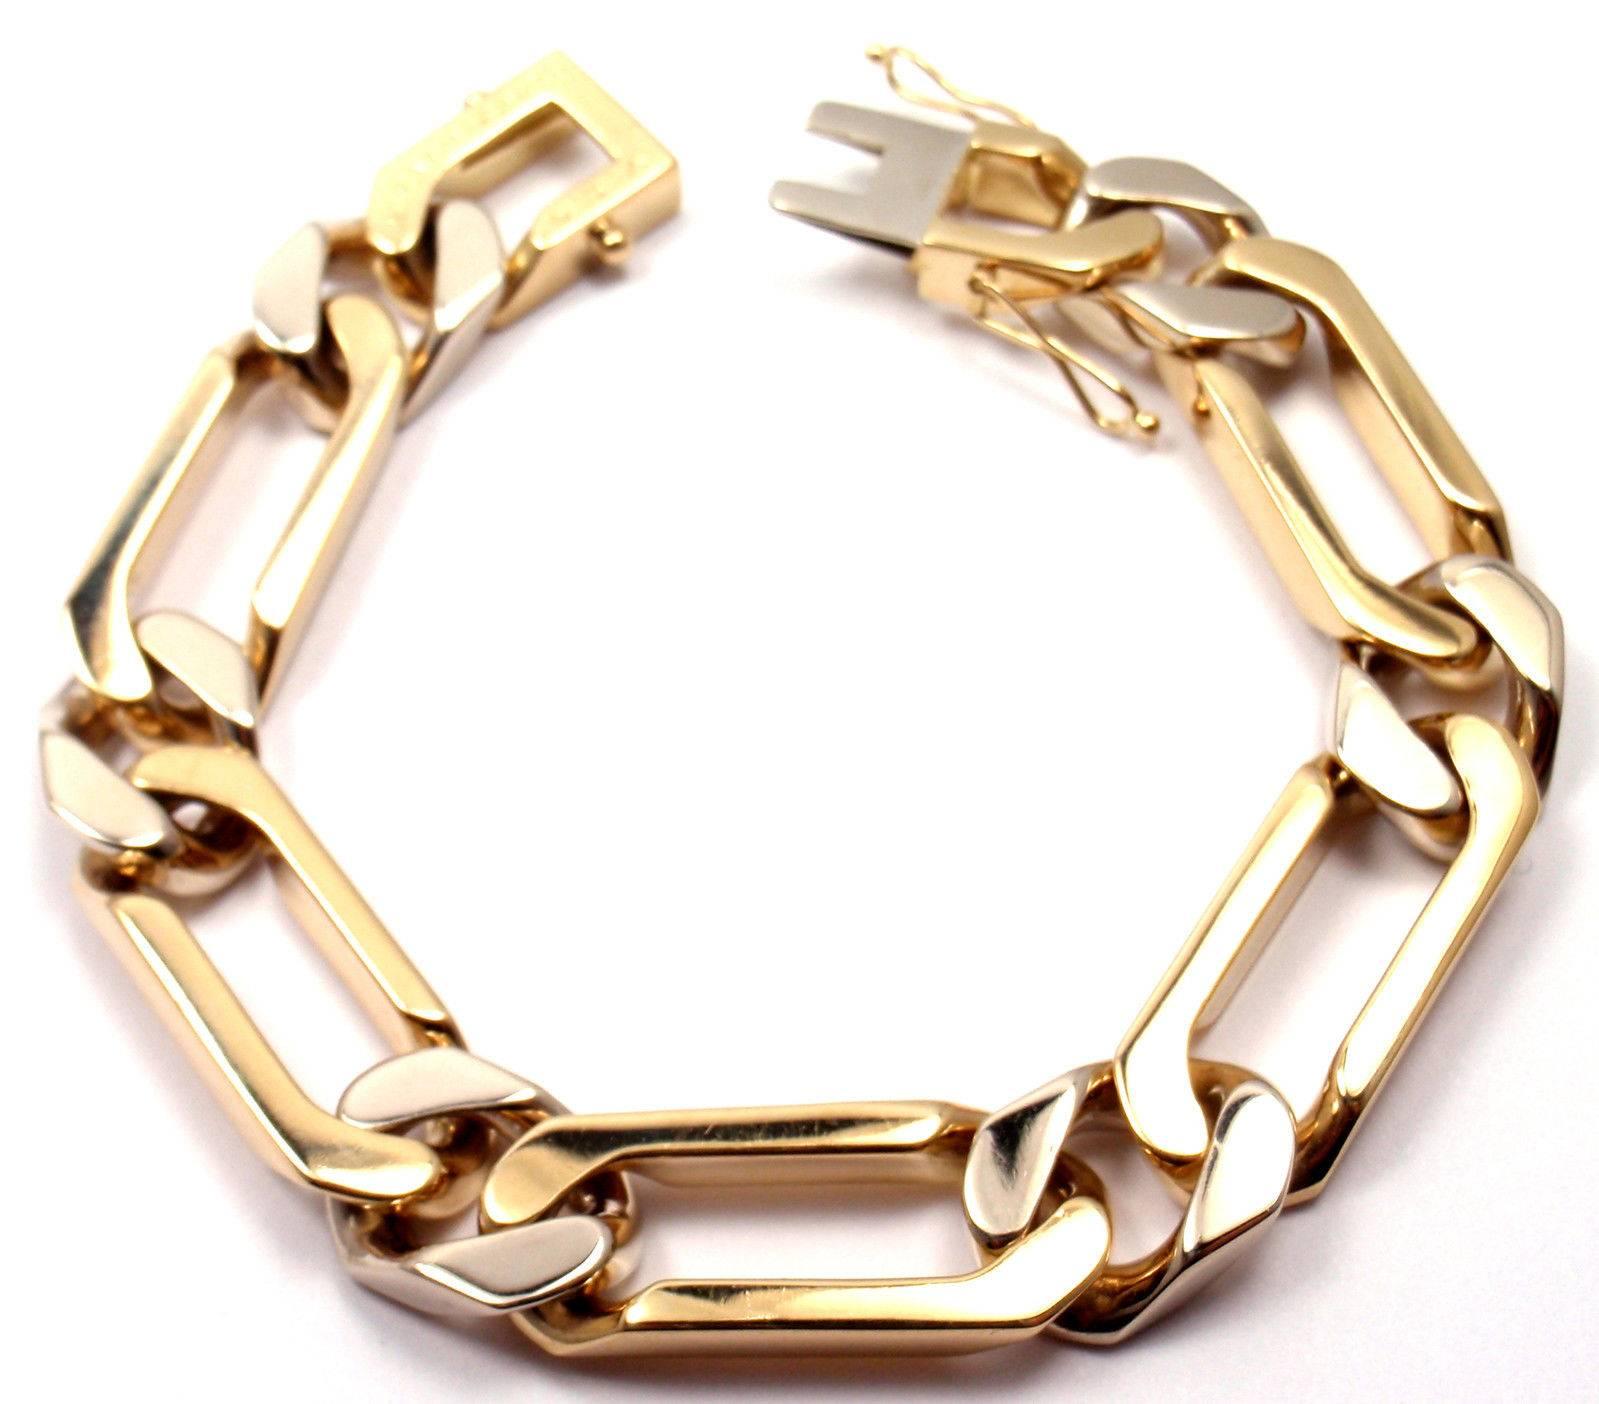 18k Yellow And White Gold Heavy Link Bracelet by Van Cleef & Arpels.

Details:
Length: 7 3/4